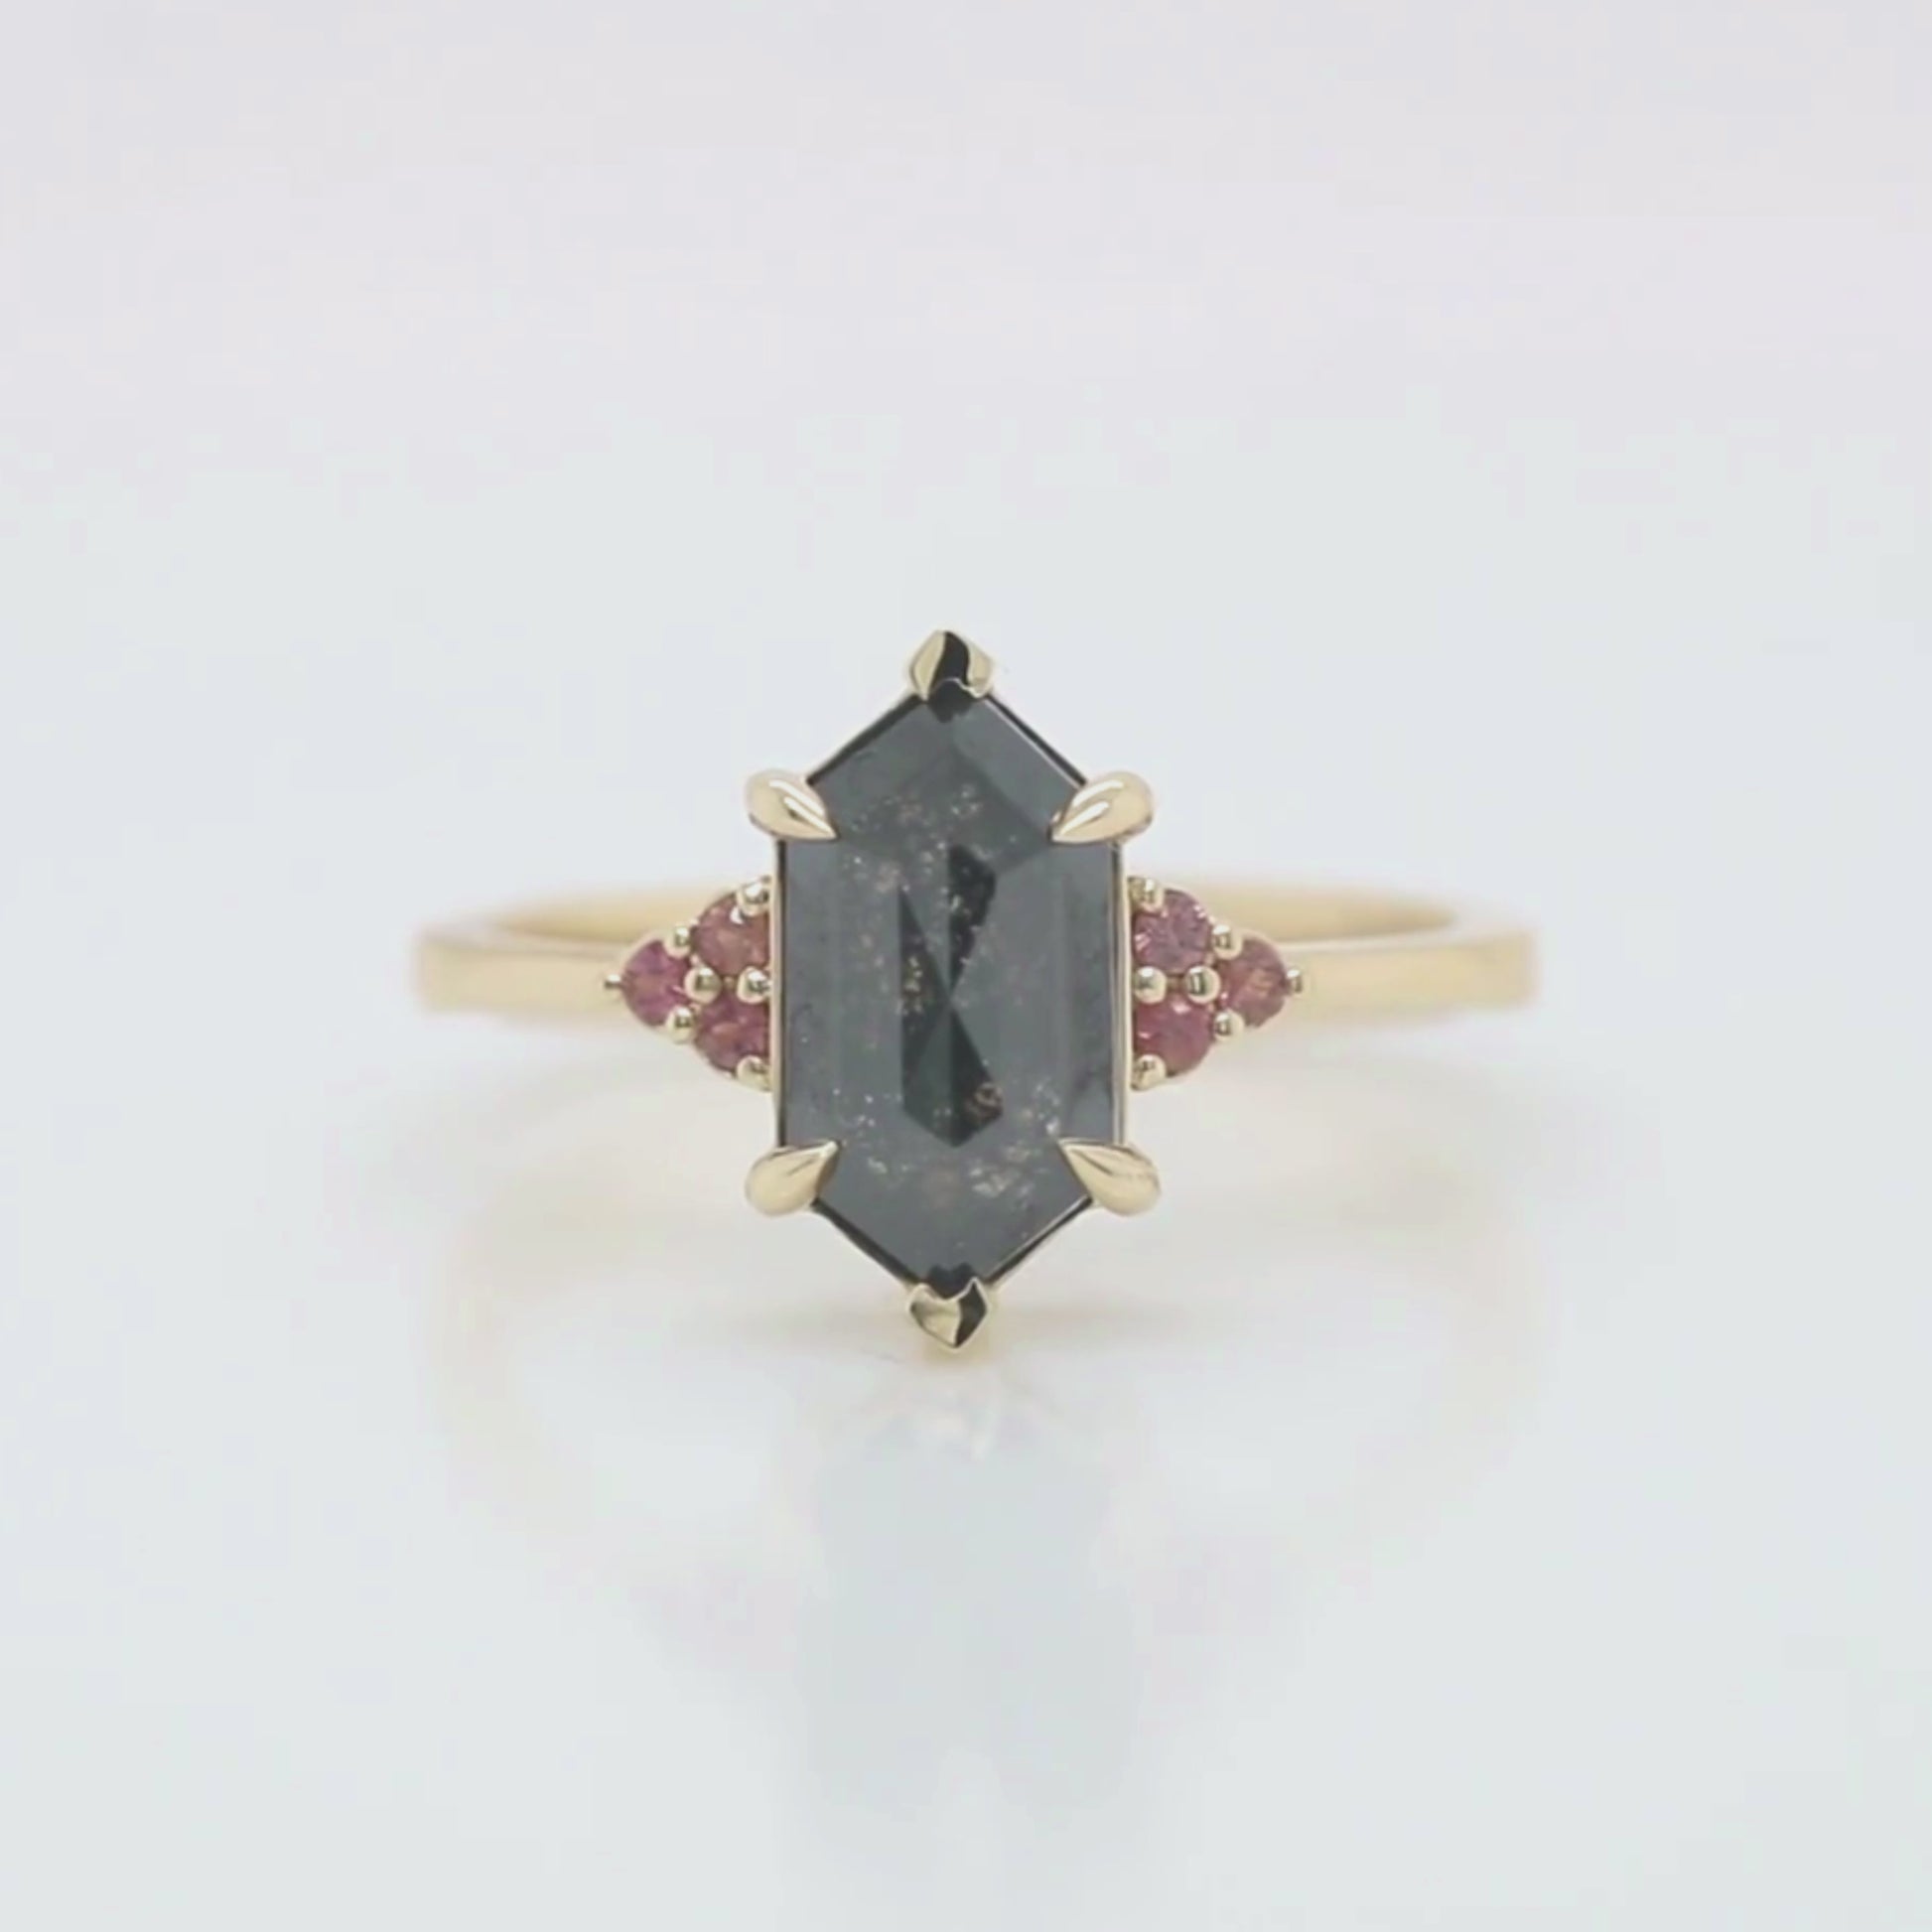 Imogene Ring with a 2.21 Carat Black Hexagon Celestial Diamond and Berry Sapphire Accents in 14k Yellow Gold - Ready to Size and Ship